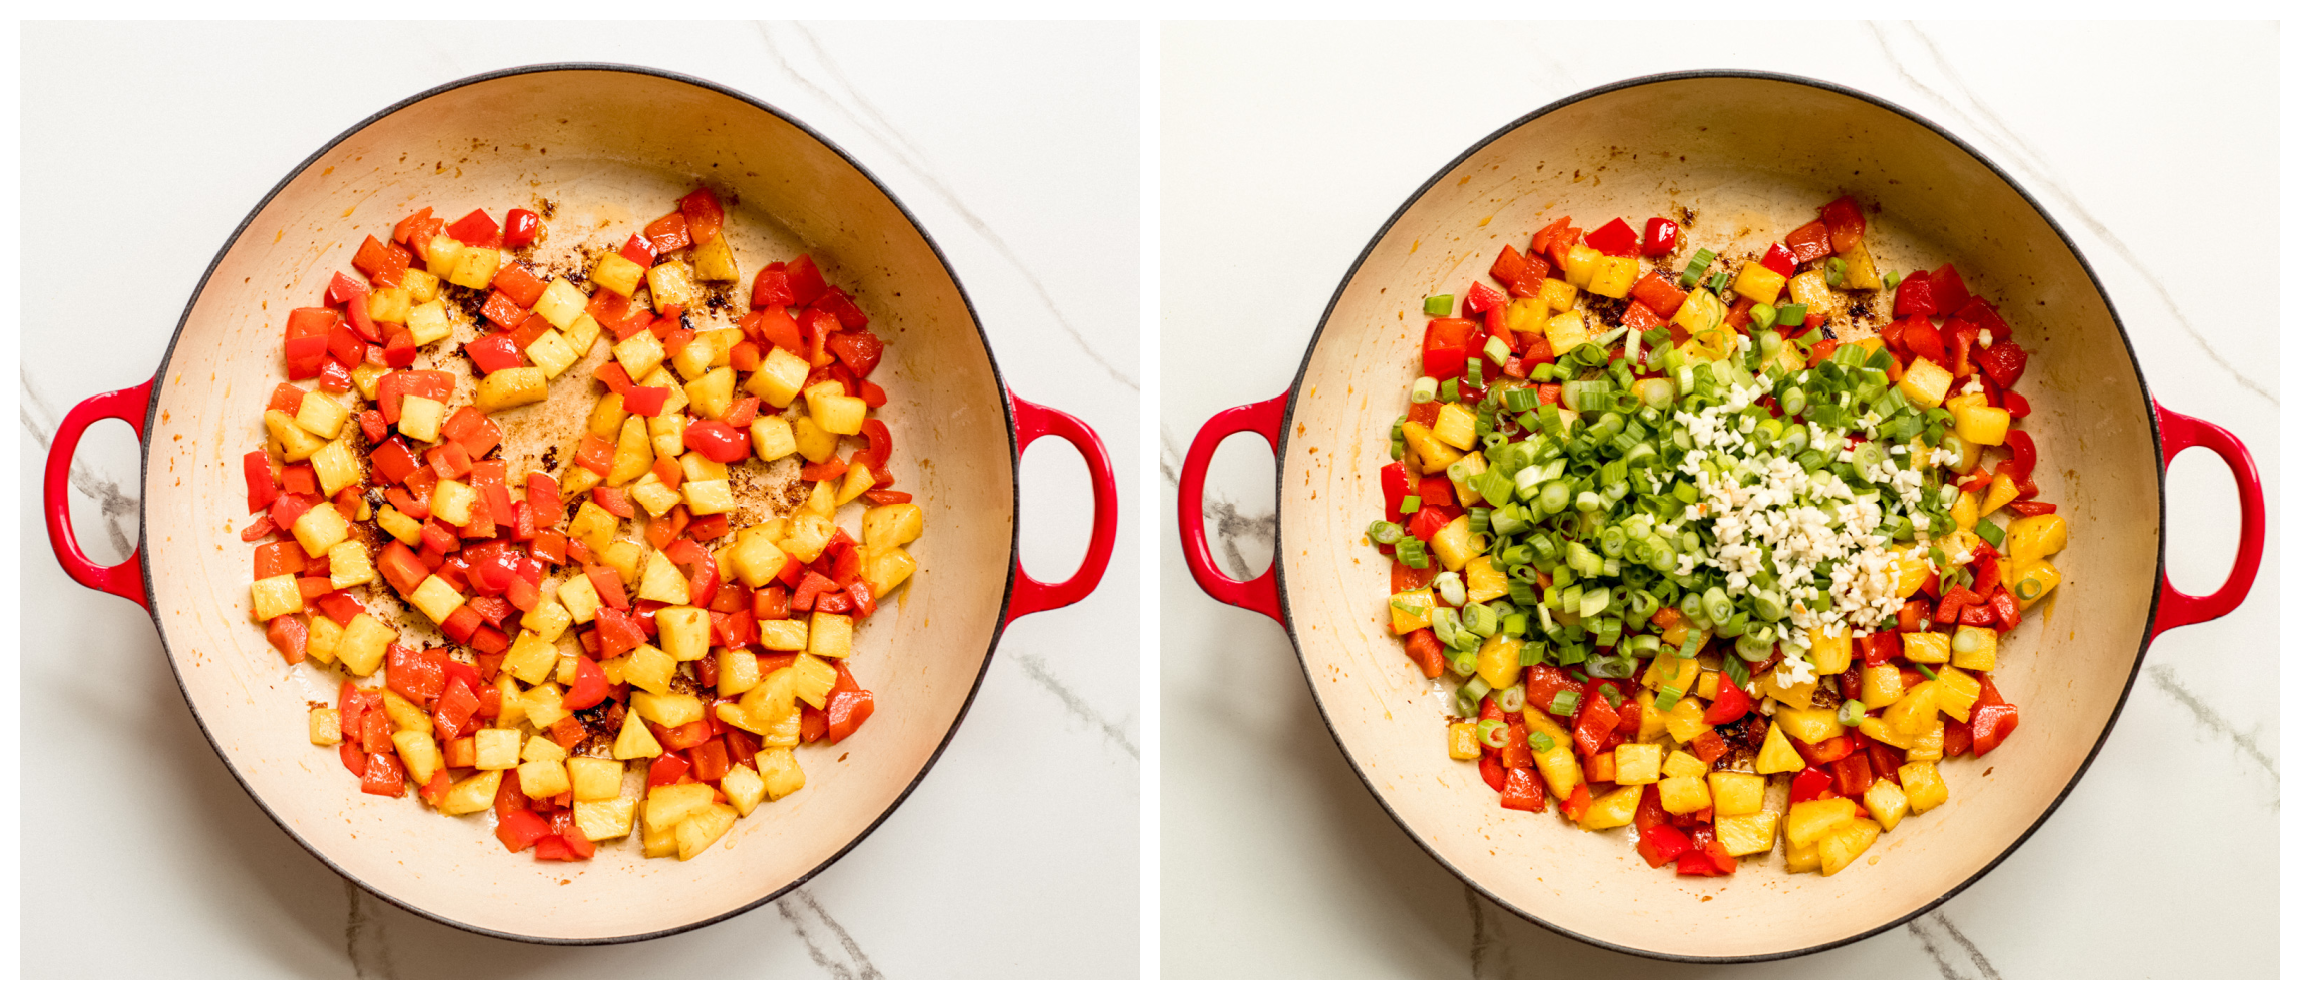 two saucepan photos showing cooked vegetables in one, and vegetables with green herbs in second.